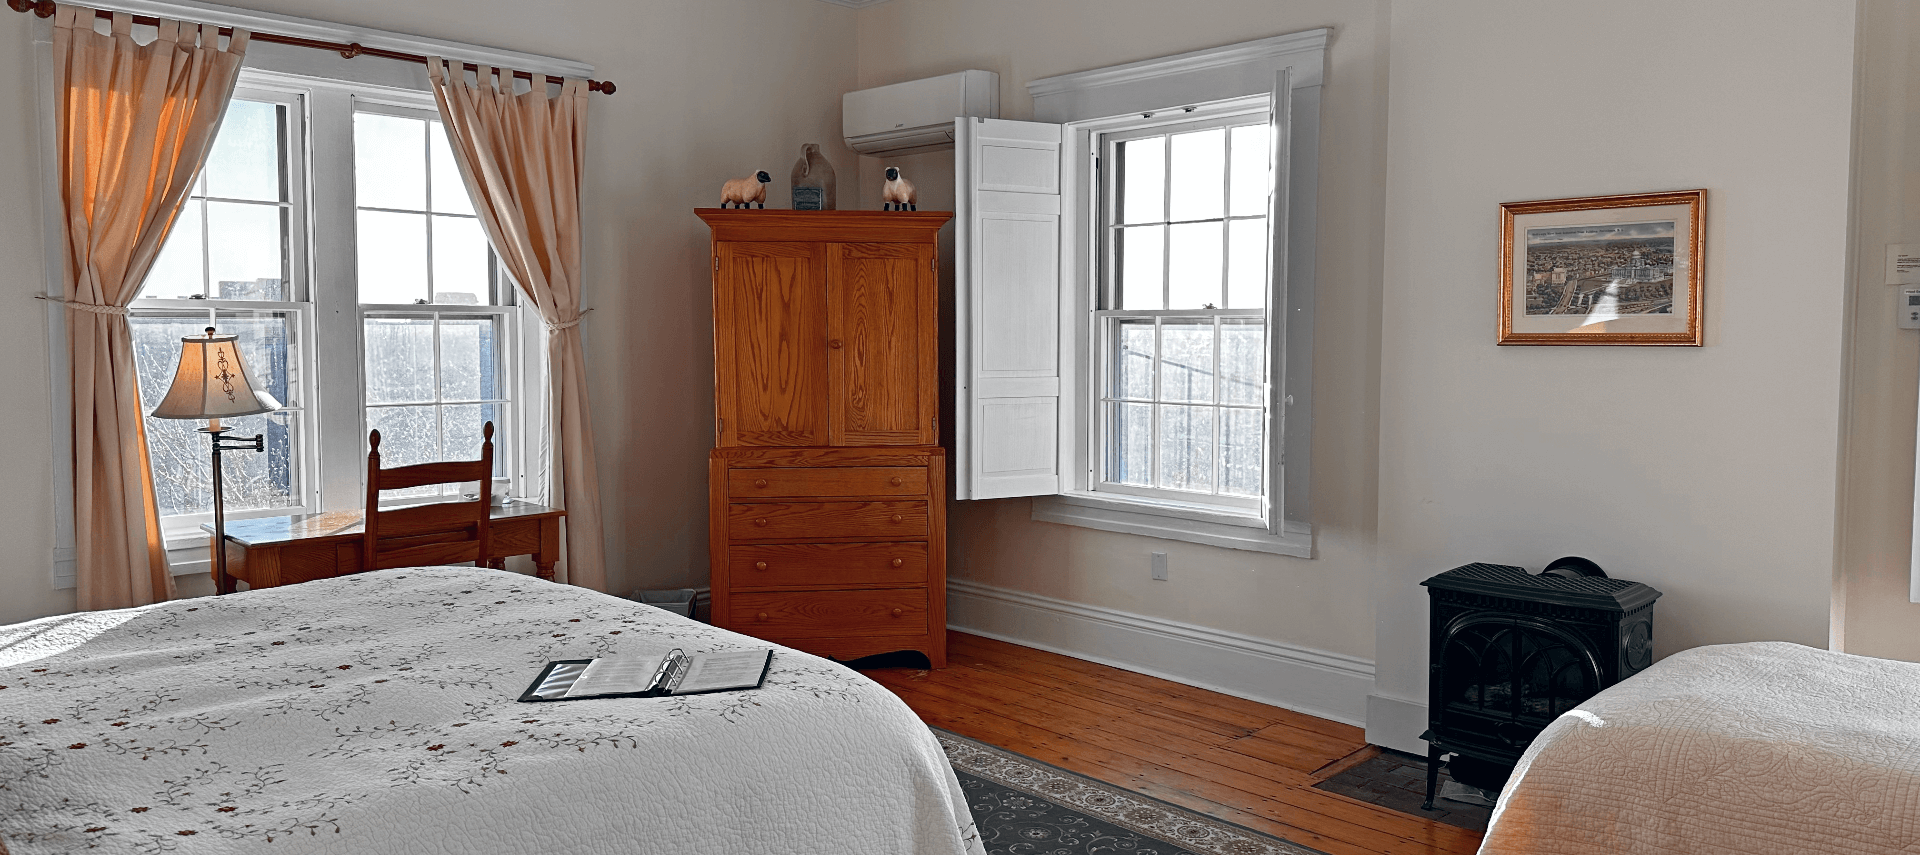 A room with 2 beds, a wood stove, armoire, and desk with a chair.